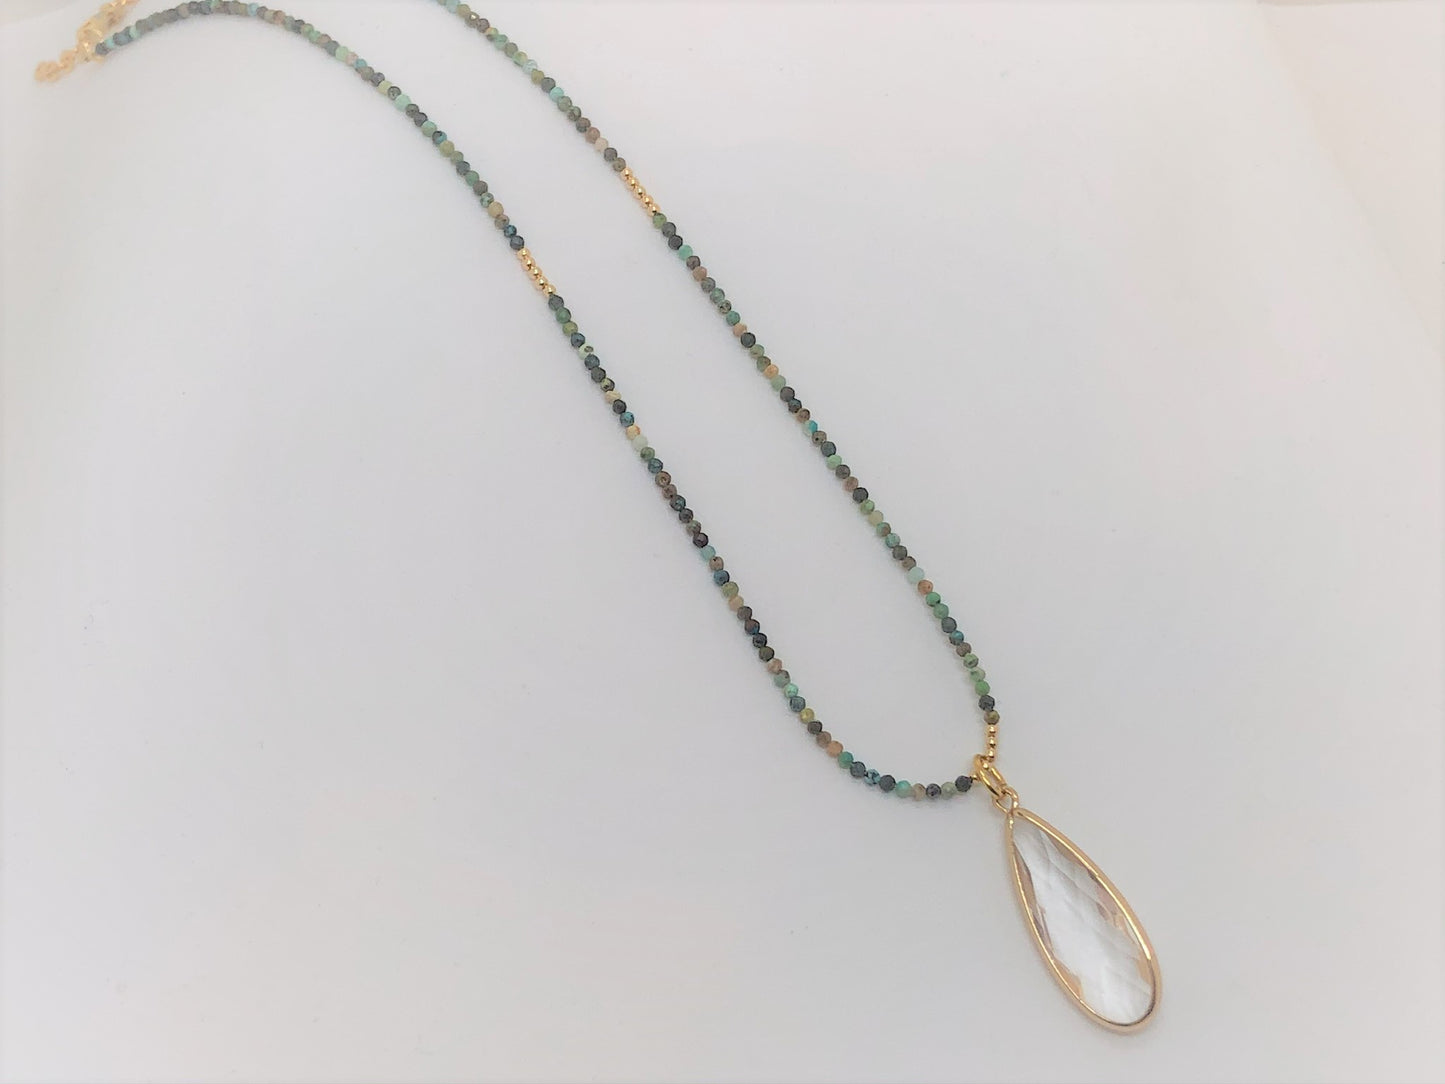 African Turquoise and Gold Necklace with a Faceted Crystal Quartz Teardrop - Emmis Jewelry, Necklace, [product_color]